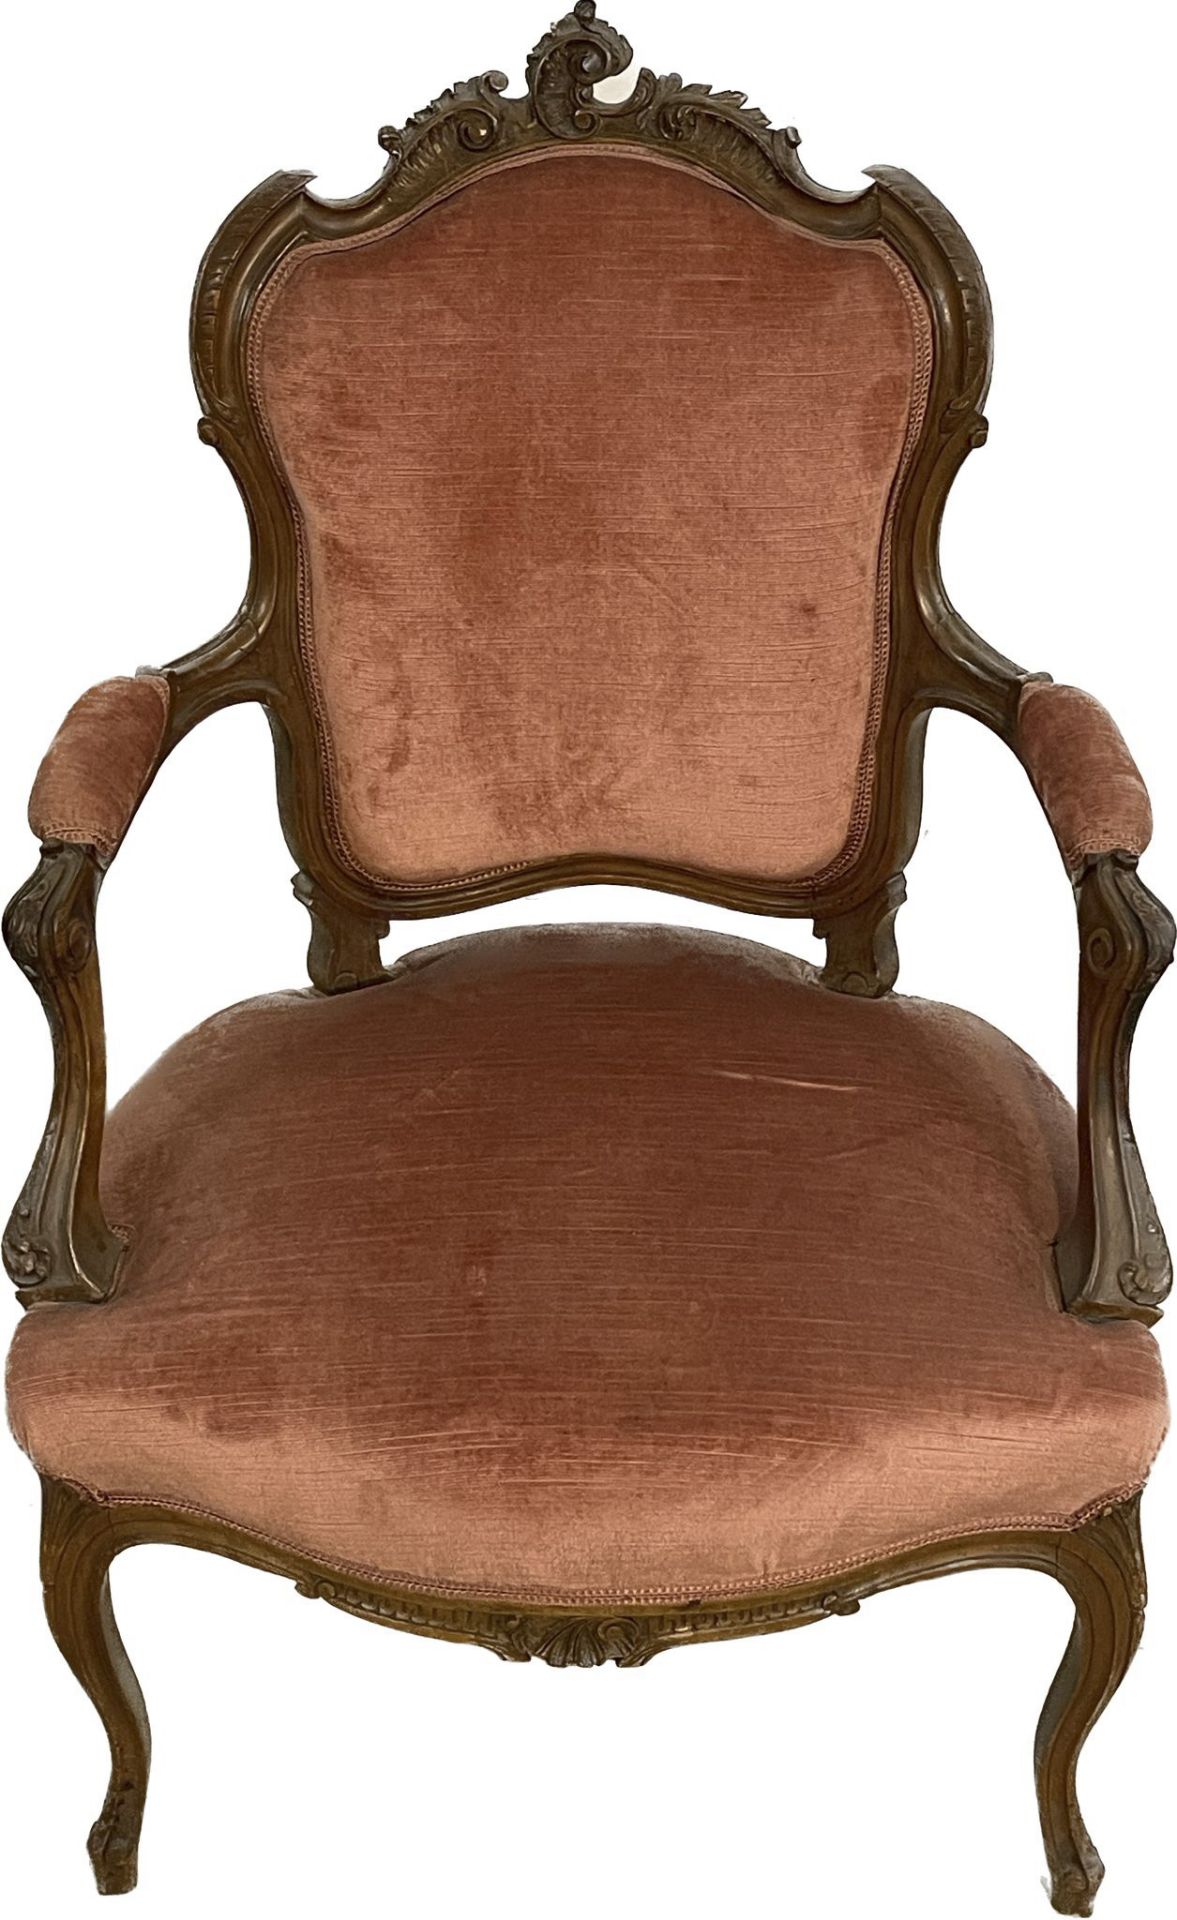 Louis-Phillipe settee, circa 1860/70, solid walnut, consisting of a sofa and two armchairs, sofa: - Image 3 of 3